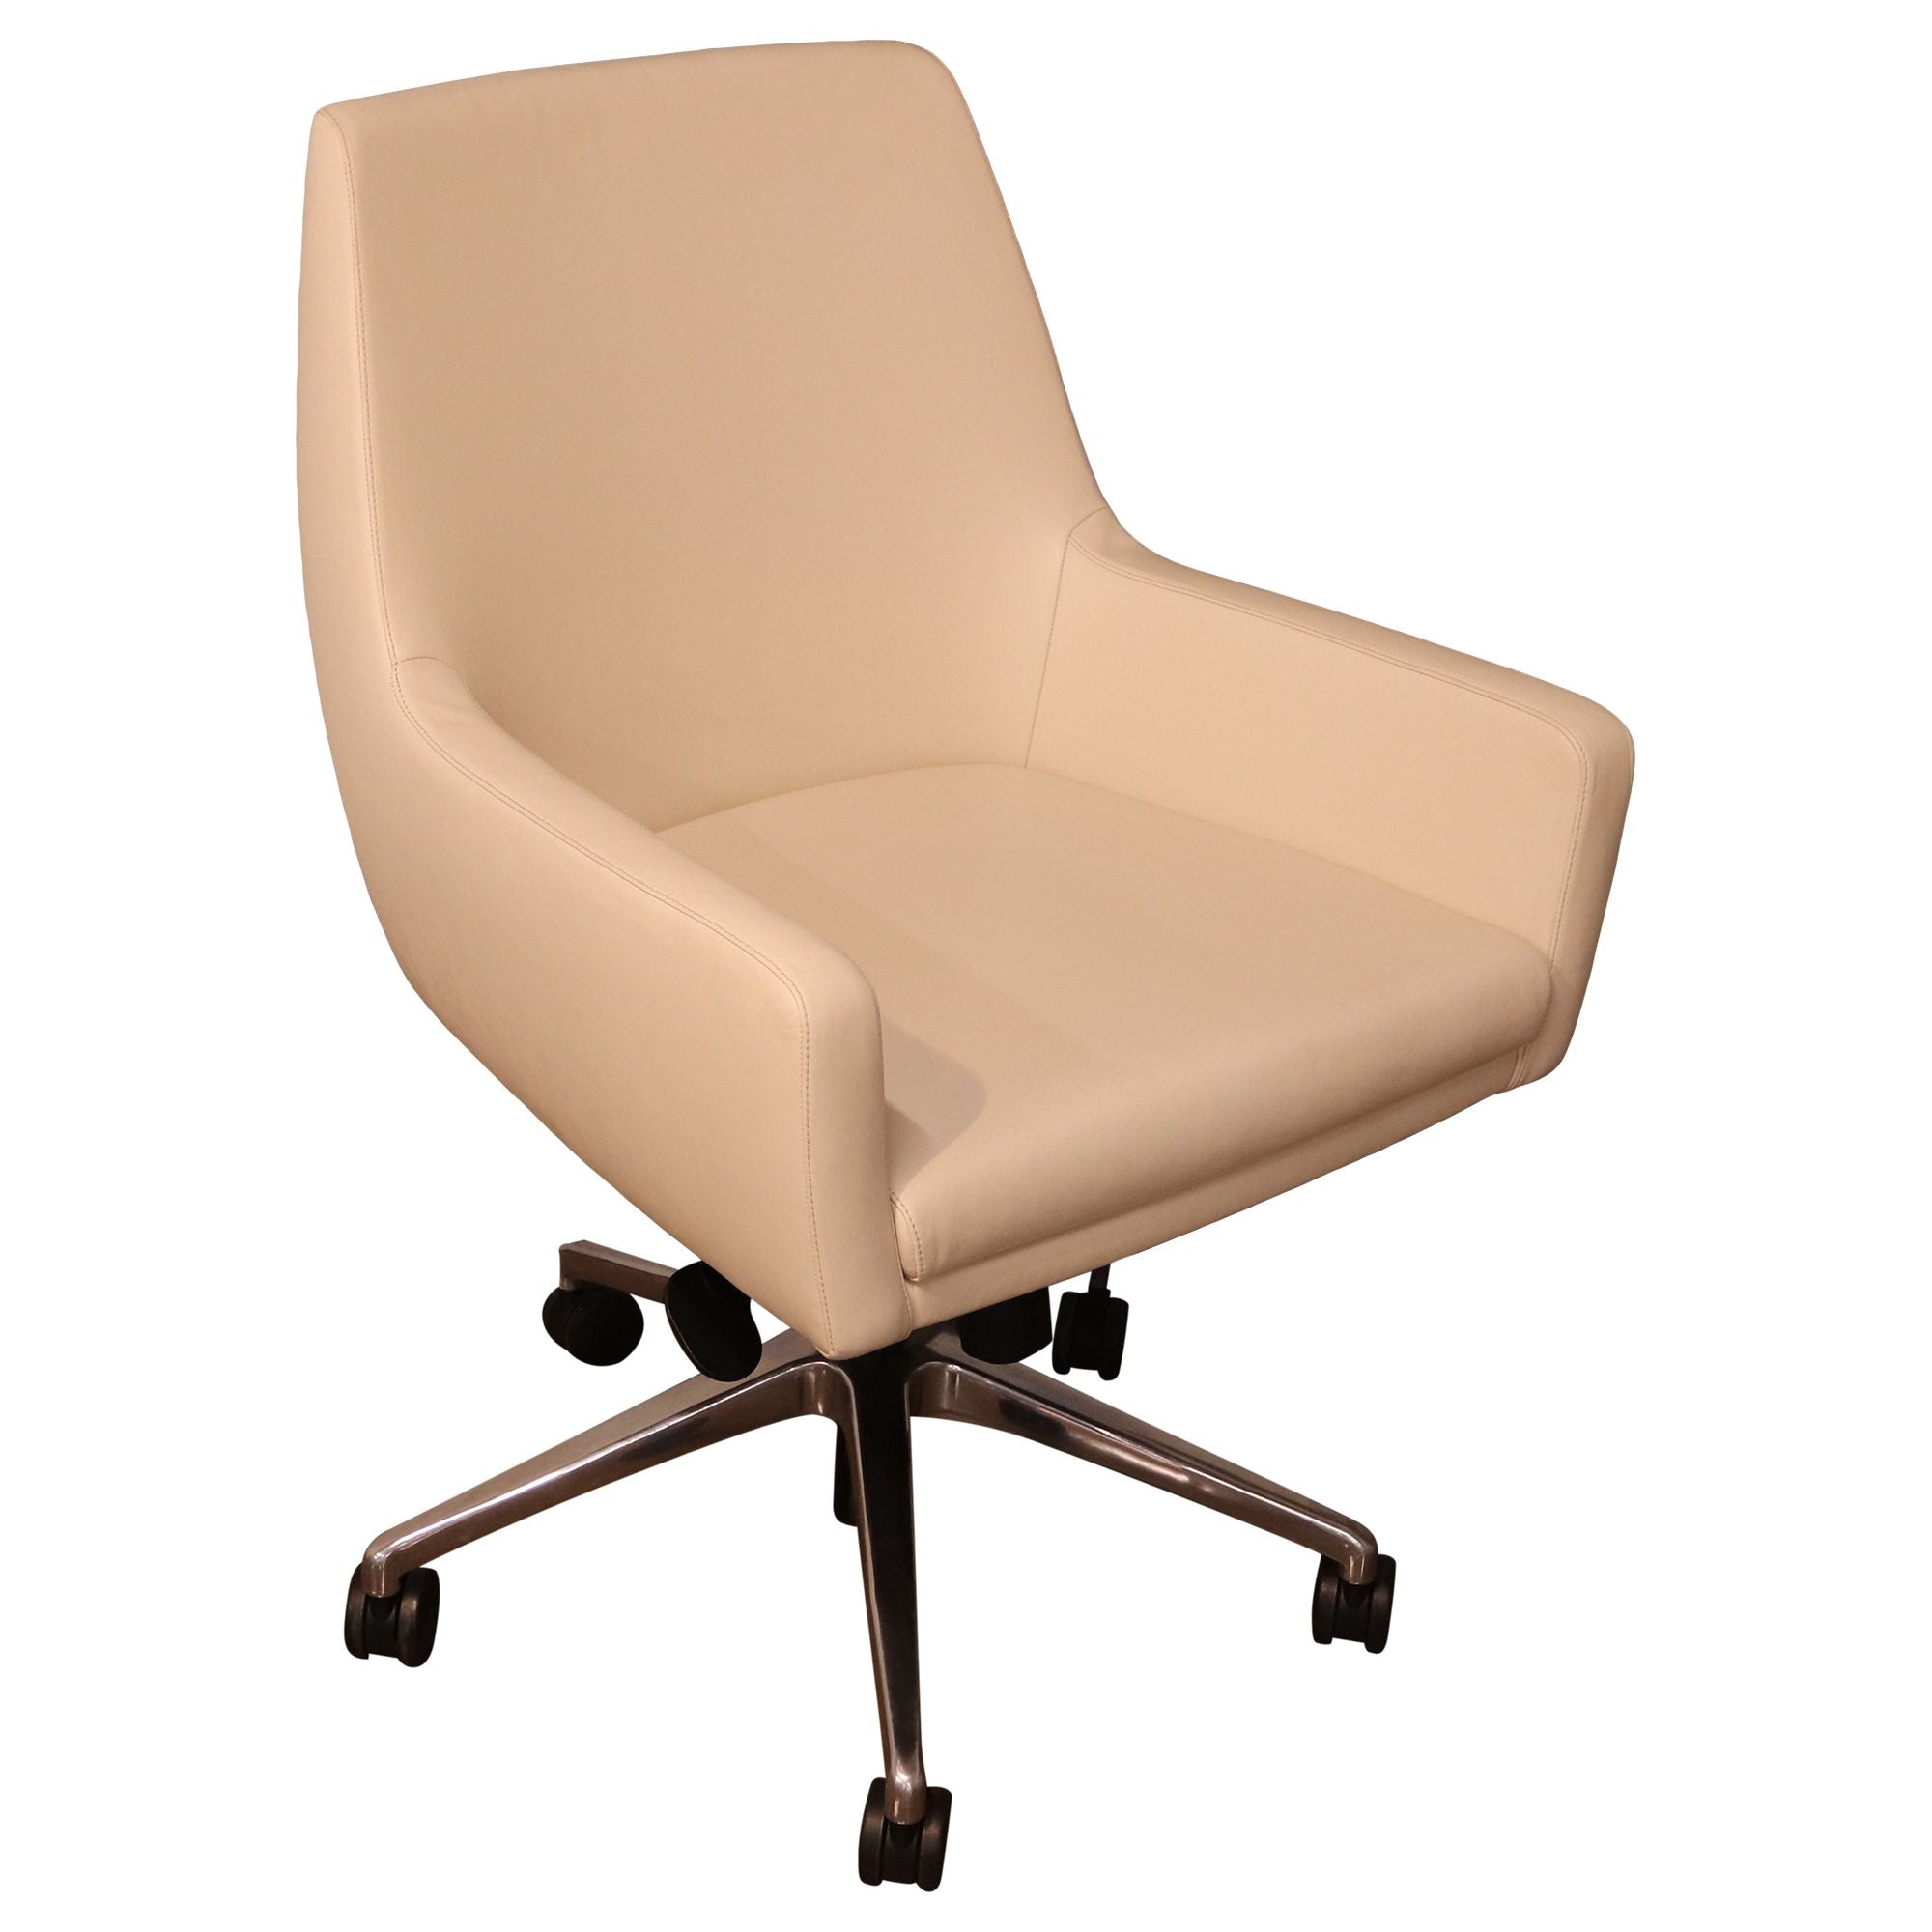 Bernhardt Cardan Conference Chair, Beige - Preowned